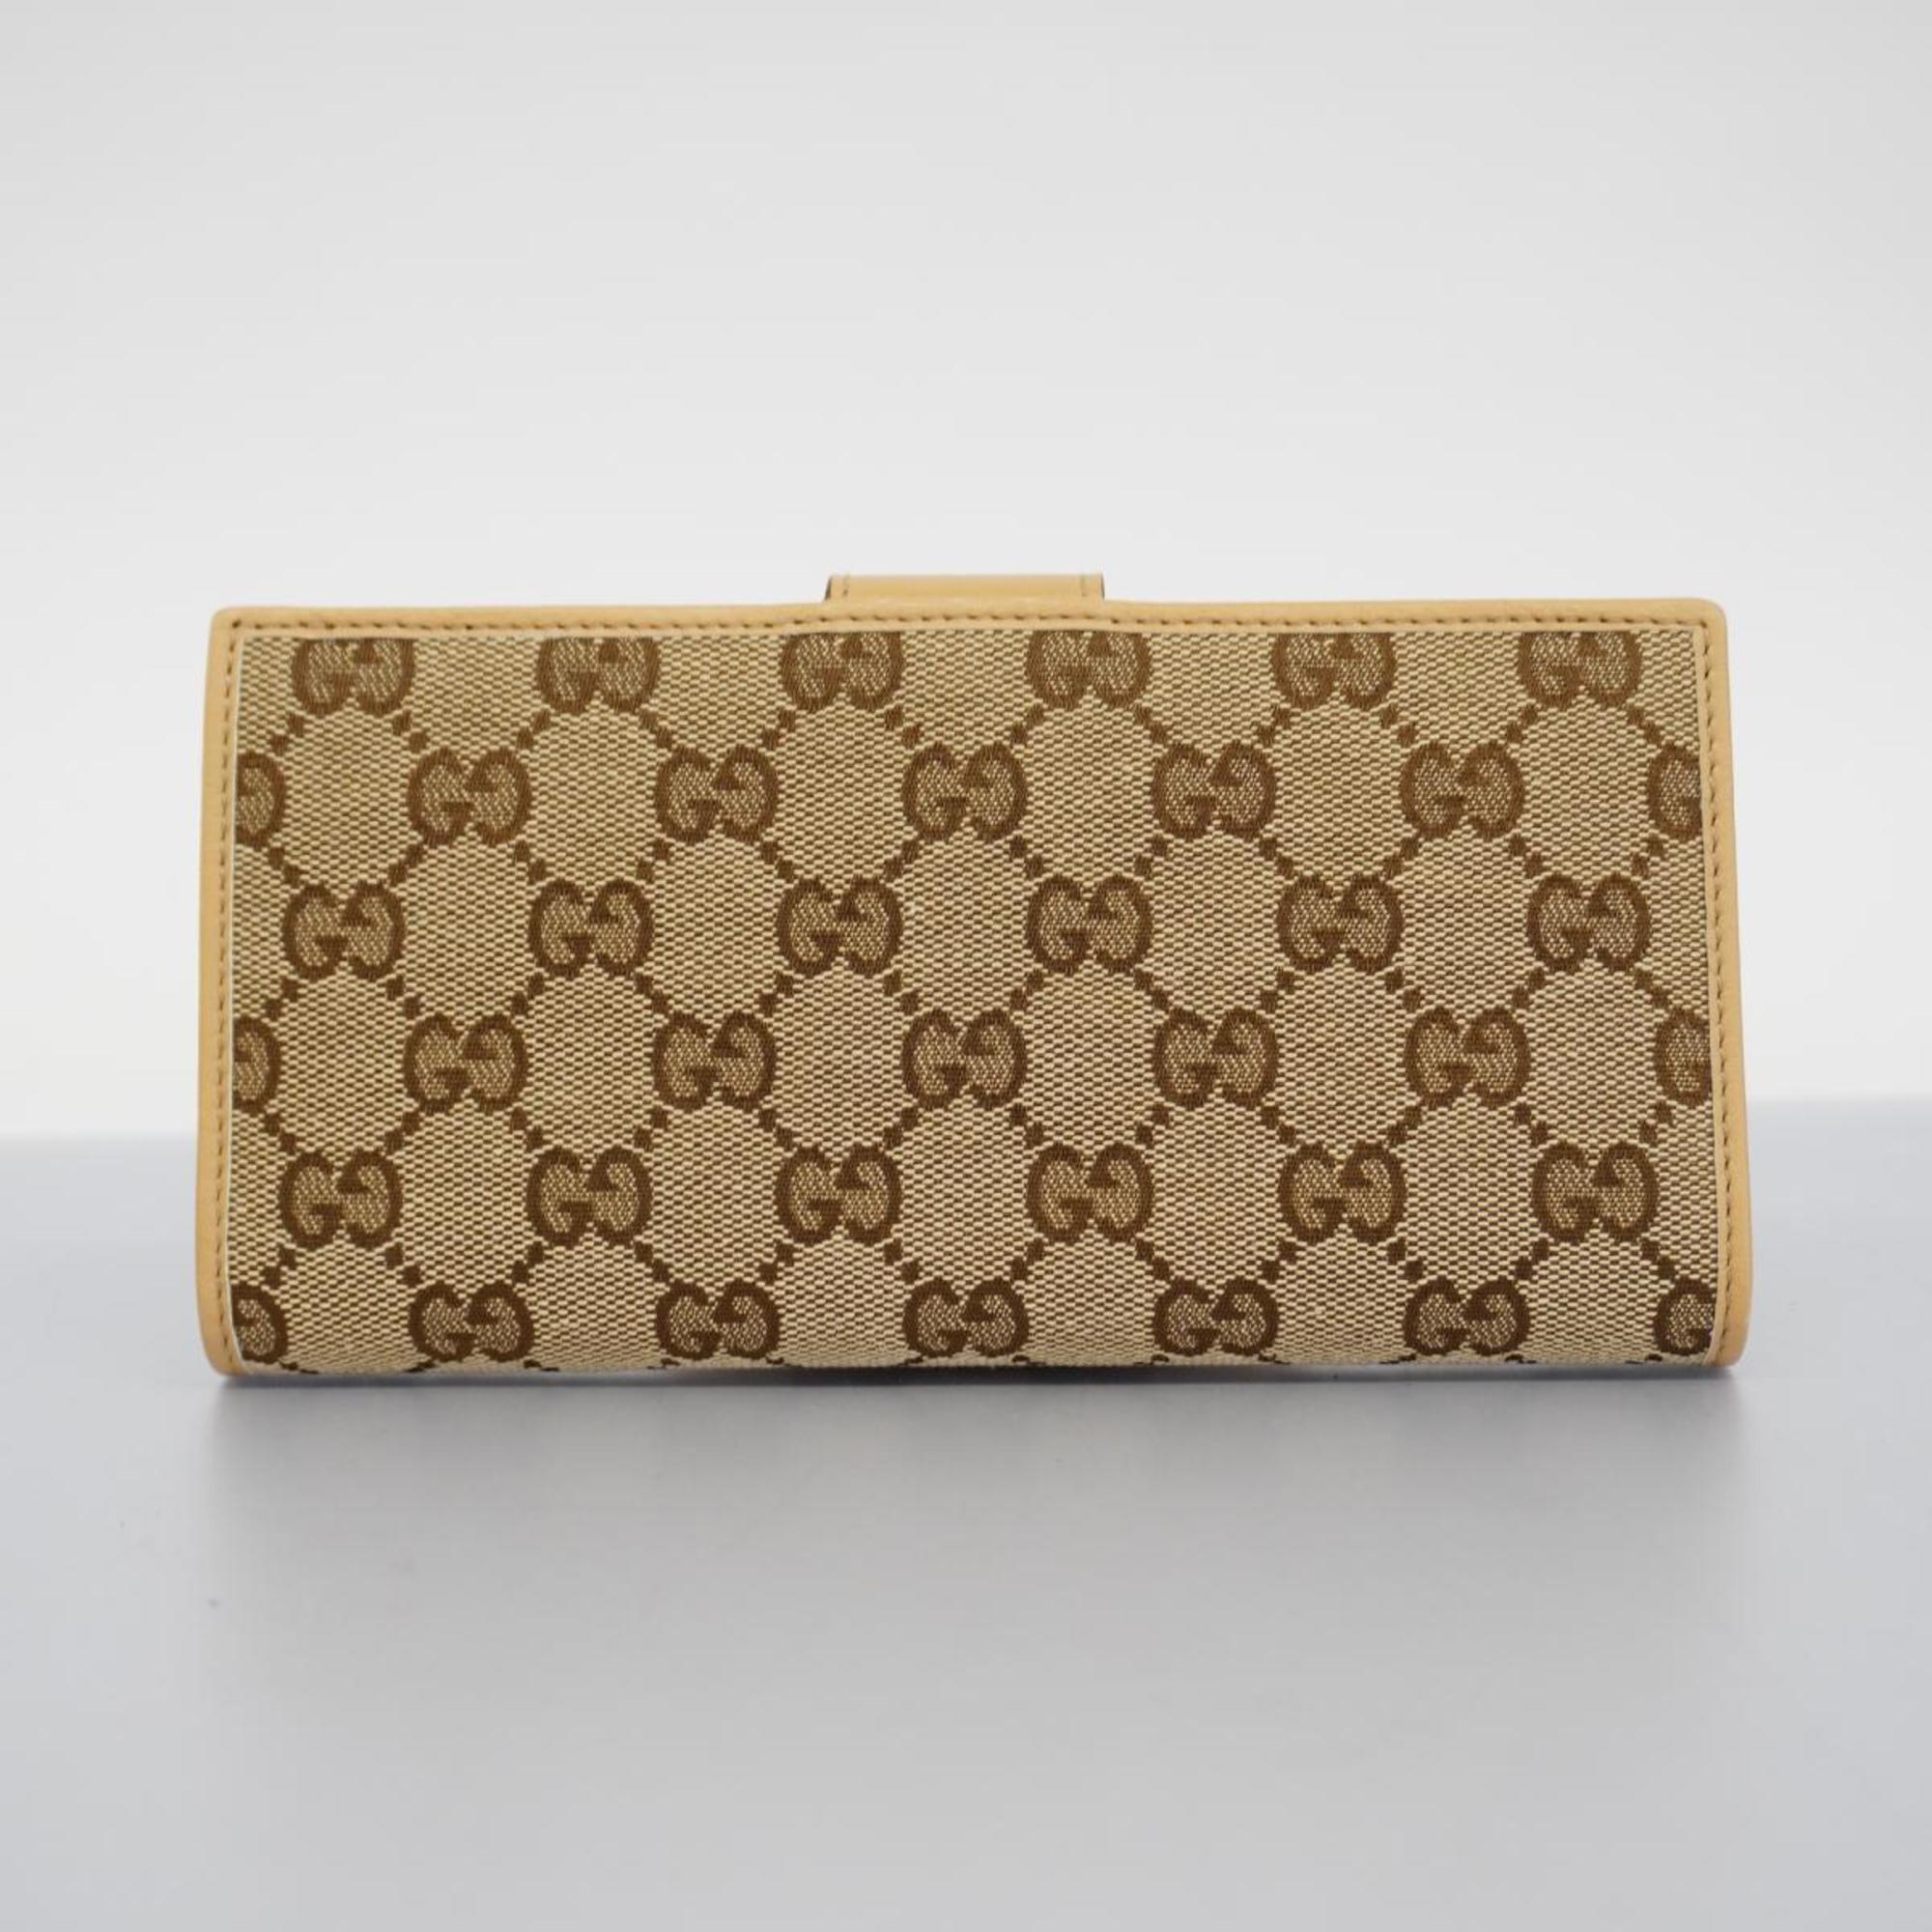 Gucci Long Wallet GG Canvas 212096 Leather Brown Beige Champagne Women's